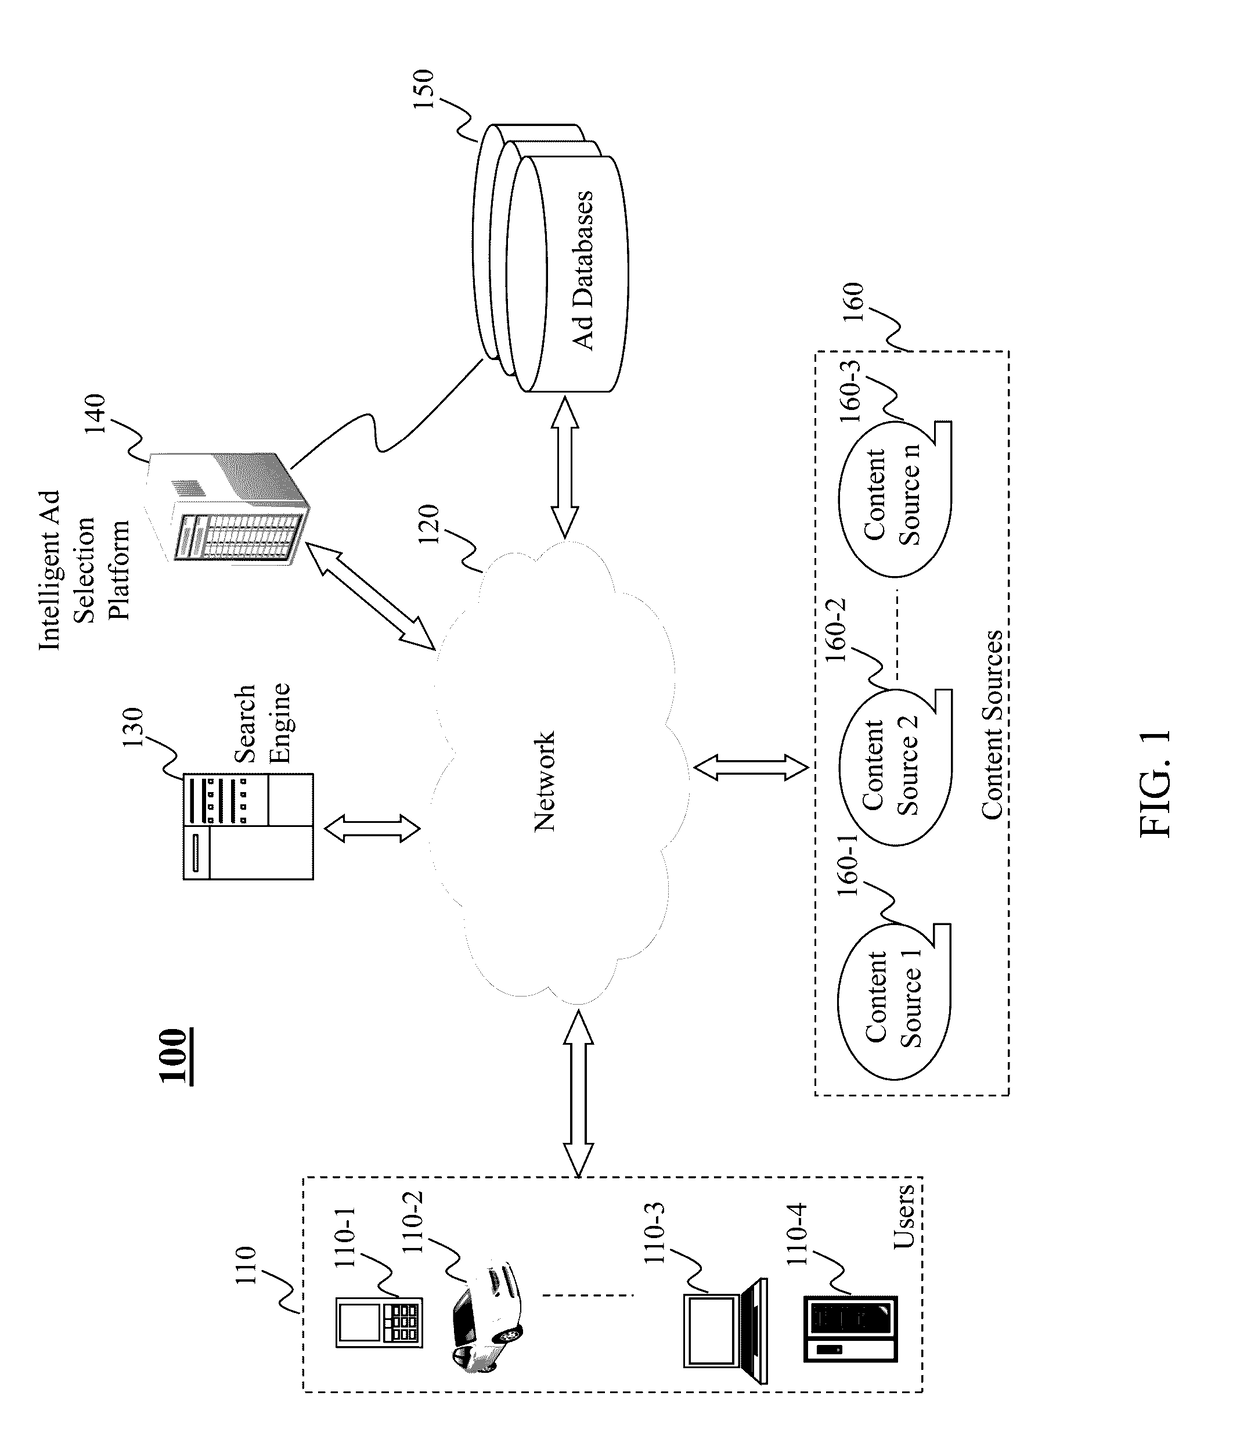 Method and system for dynamically providing advertisements for comparison